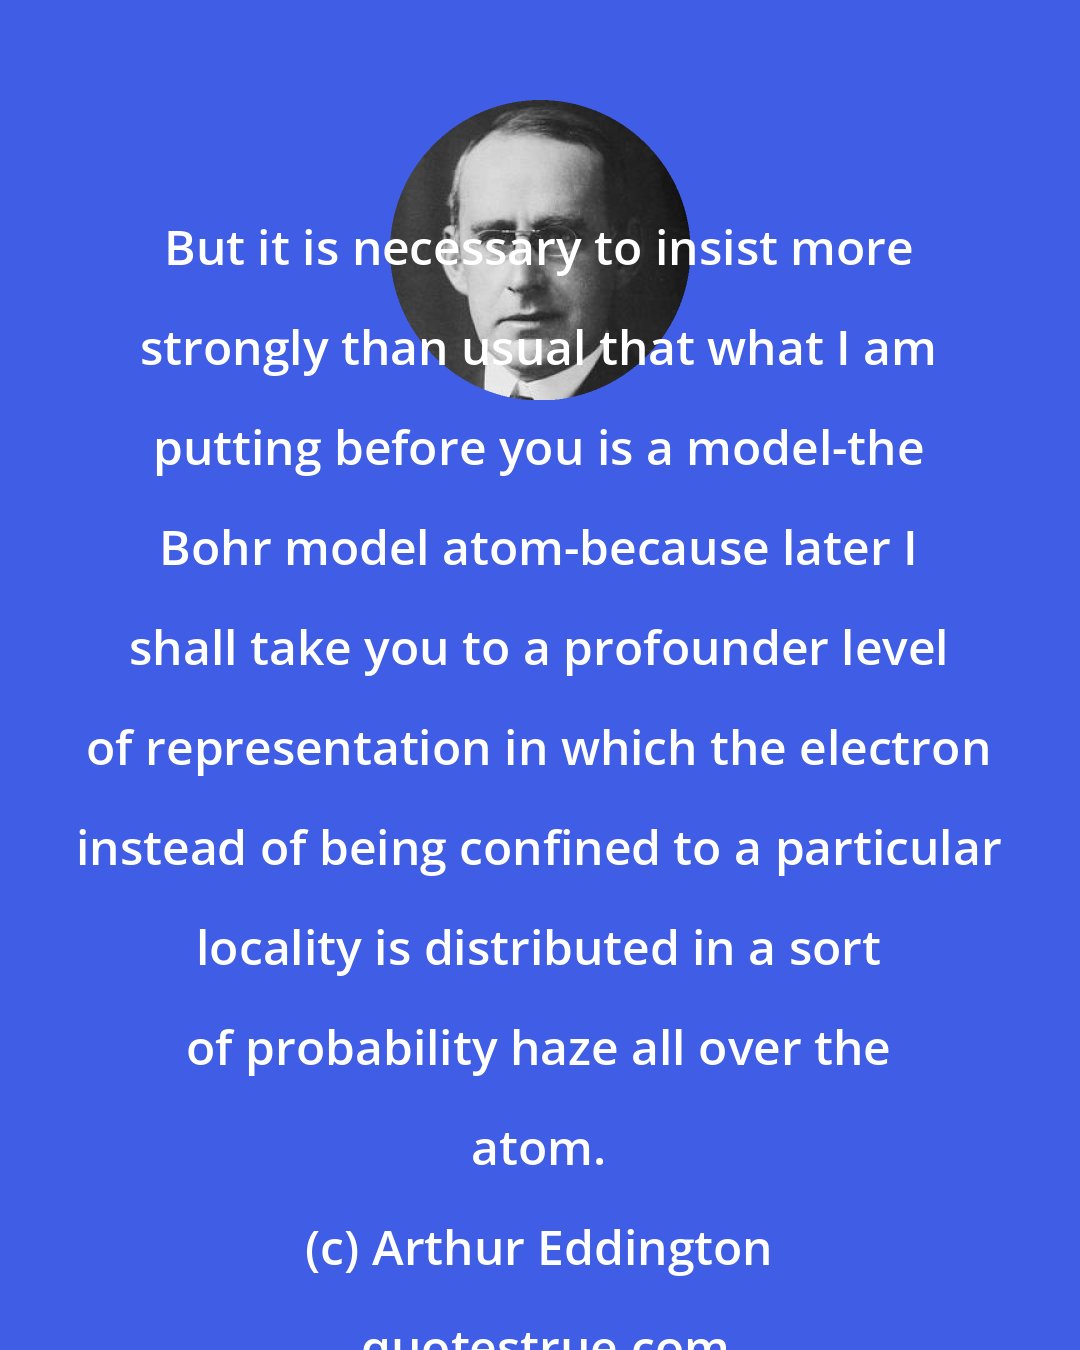 Arthur Eddington: But it is necessary to insist more strongly than usual that what I am putting before you is a model-the Bohr model atom-because later I shall take you to a profounder level of representation in which the electron instead of being confined to a particular locality is distributed in a sort of probability haze all over the atom.